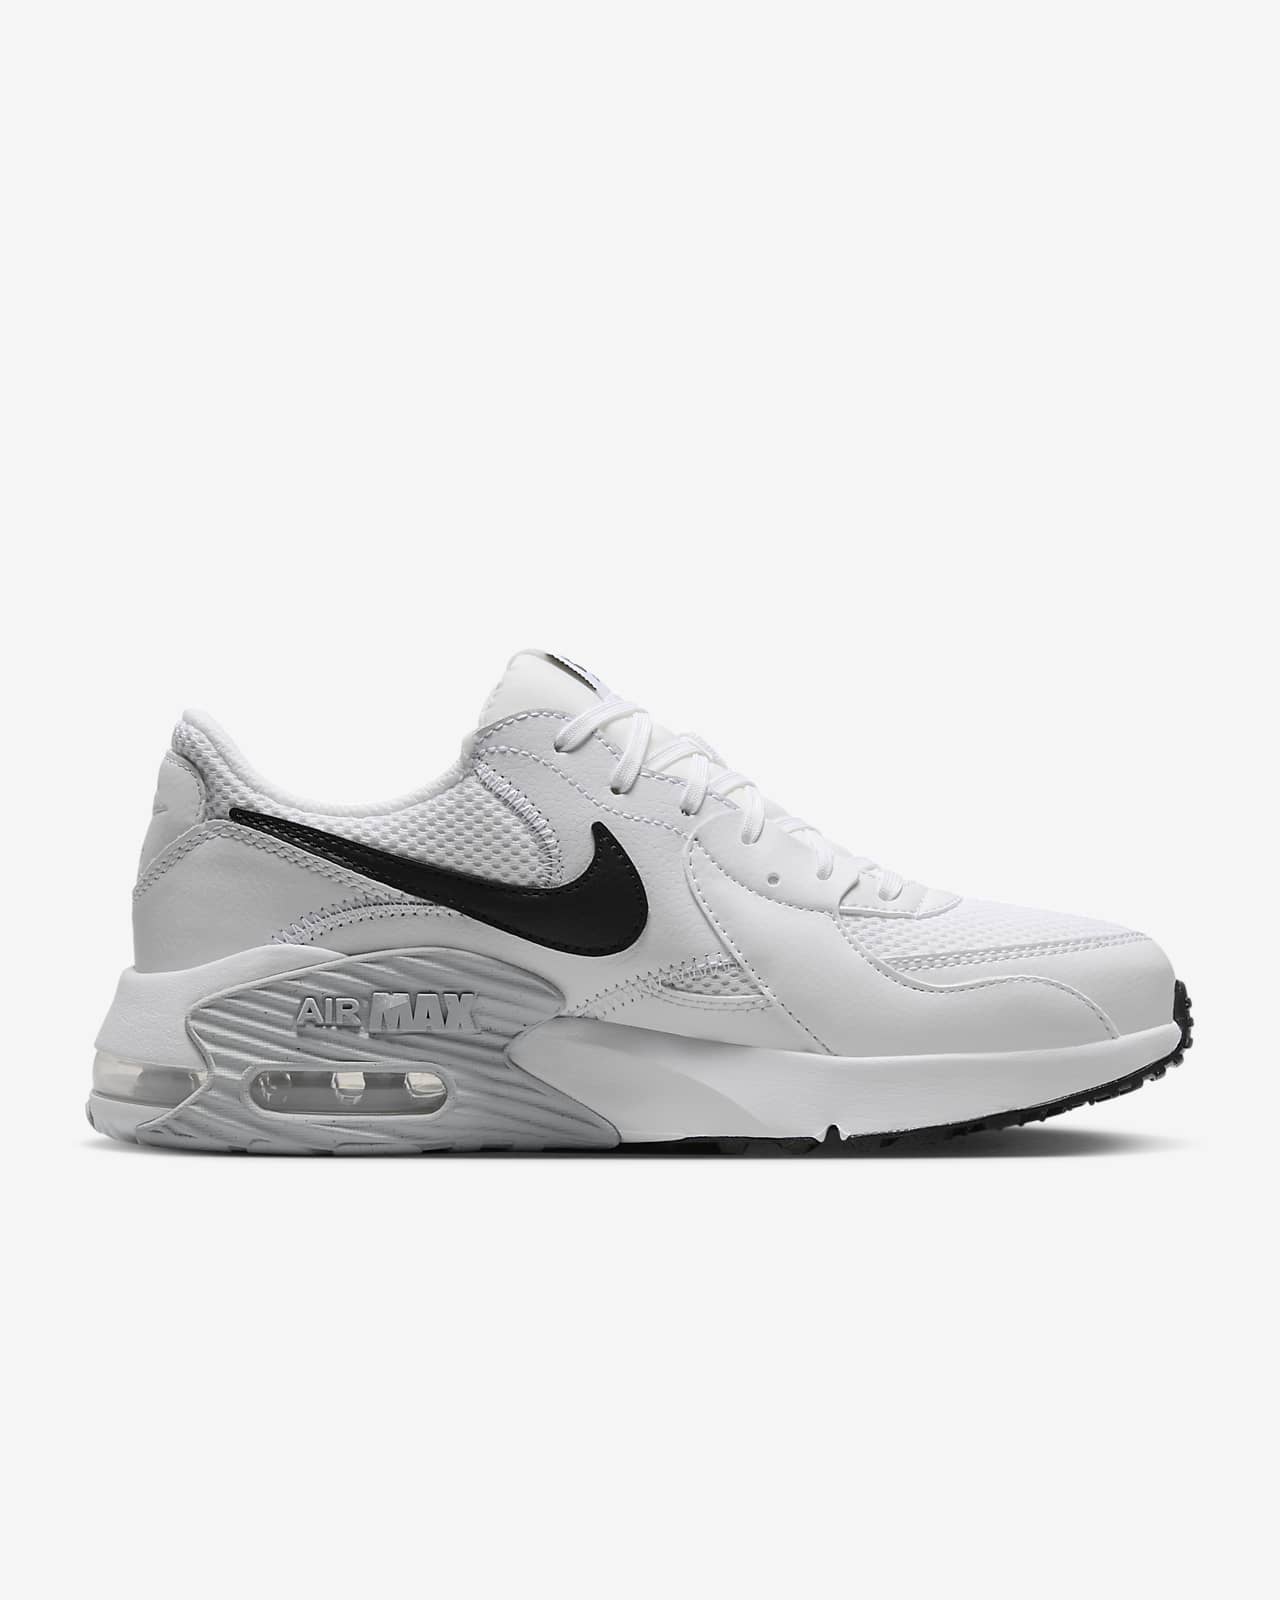 Nike Air Max Excee Women's Shoes سينما المملكه في اي بي